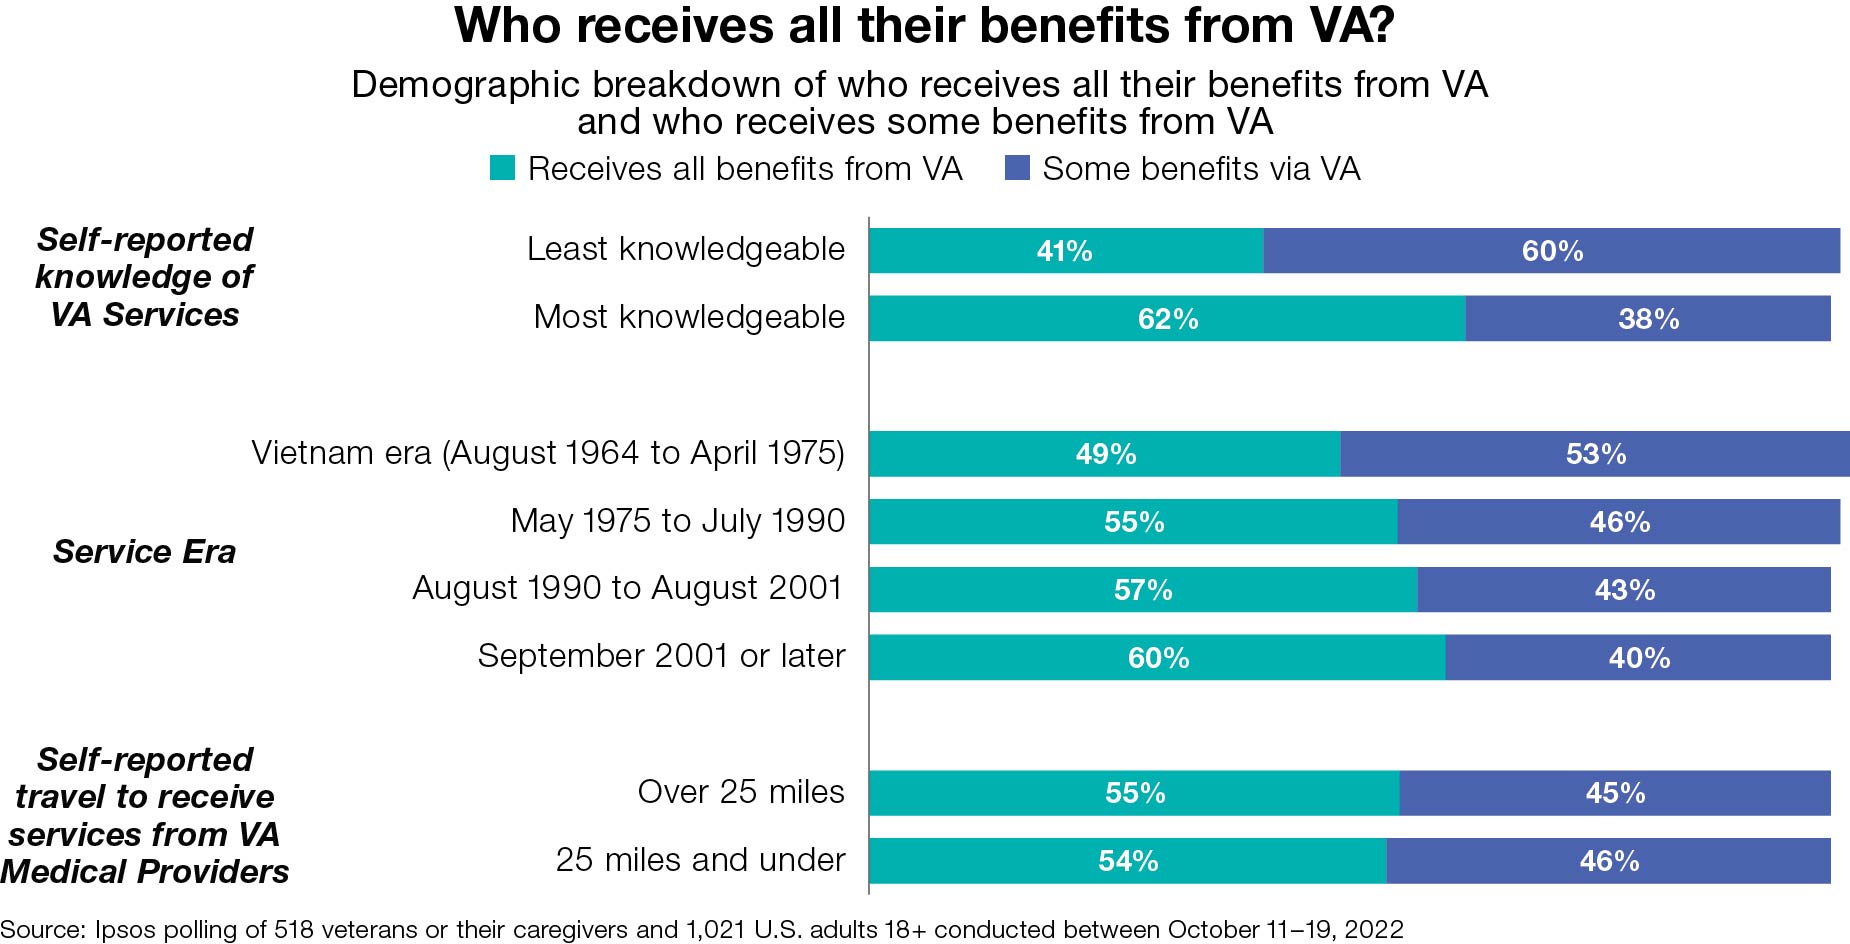 Who receives all their benefits from VA?